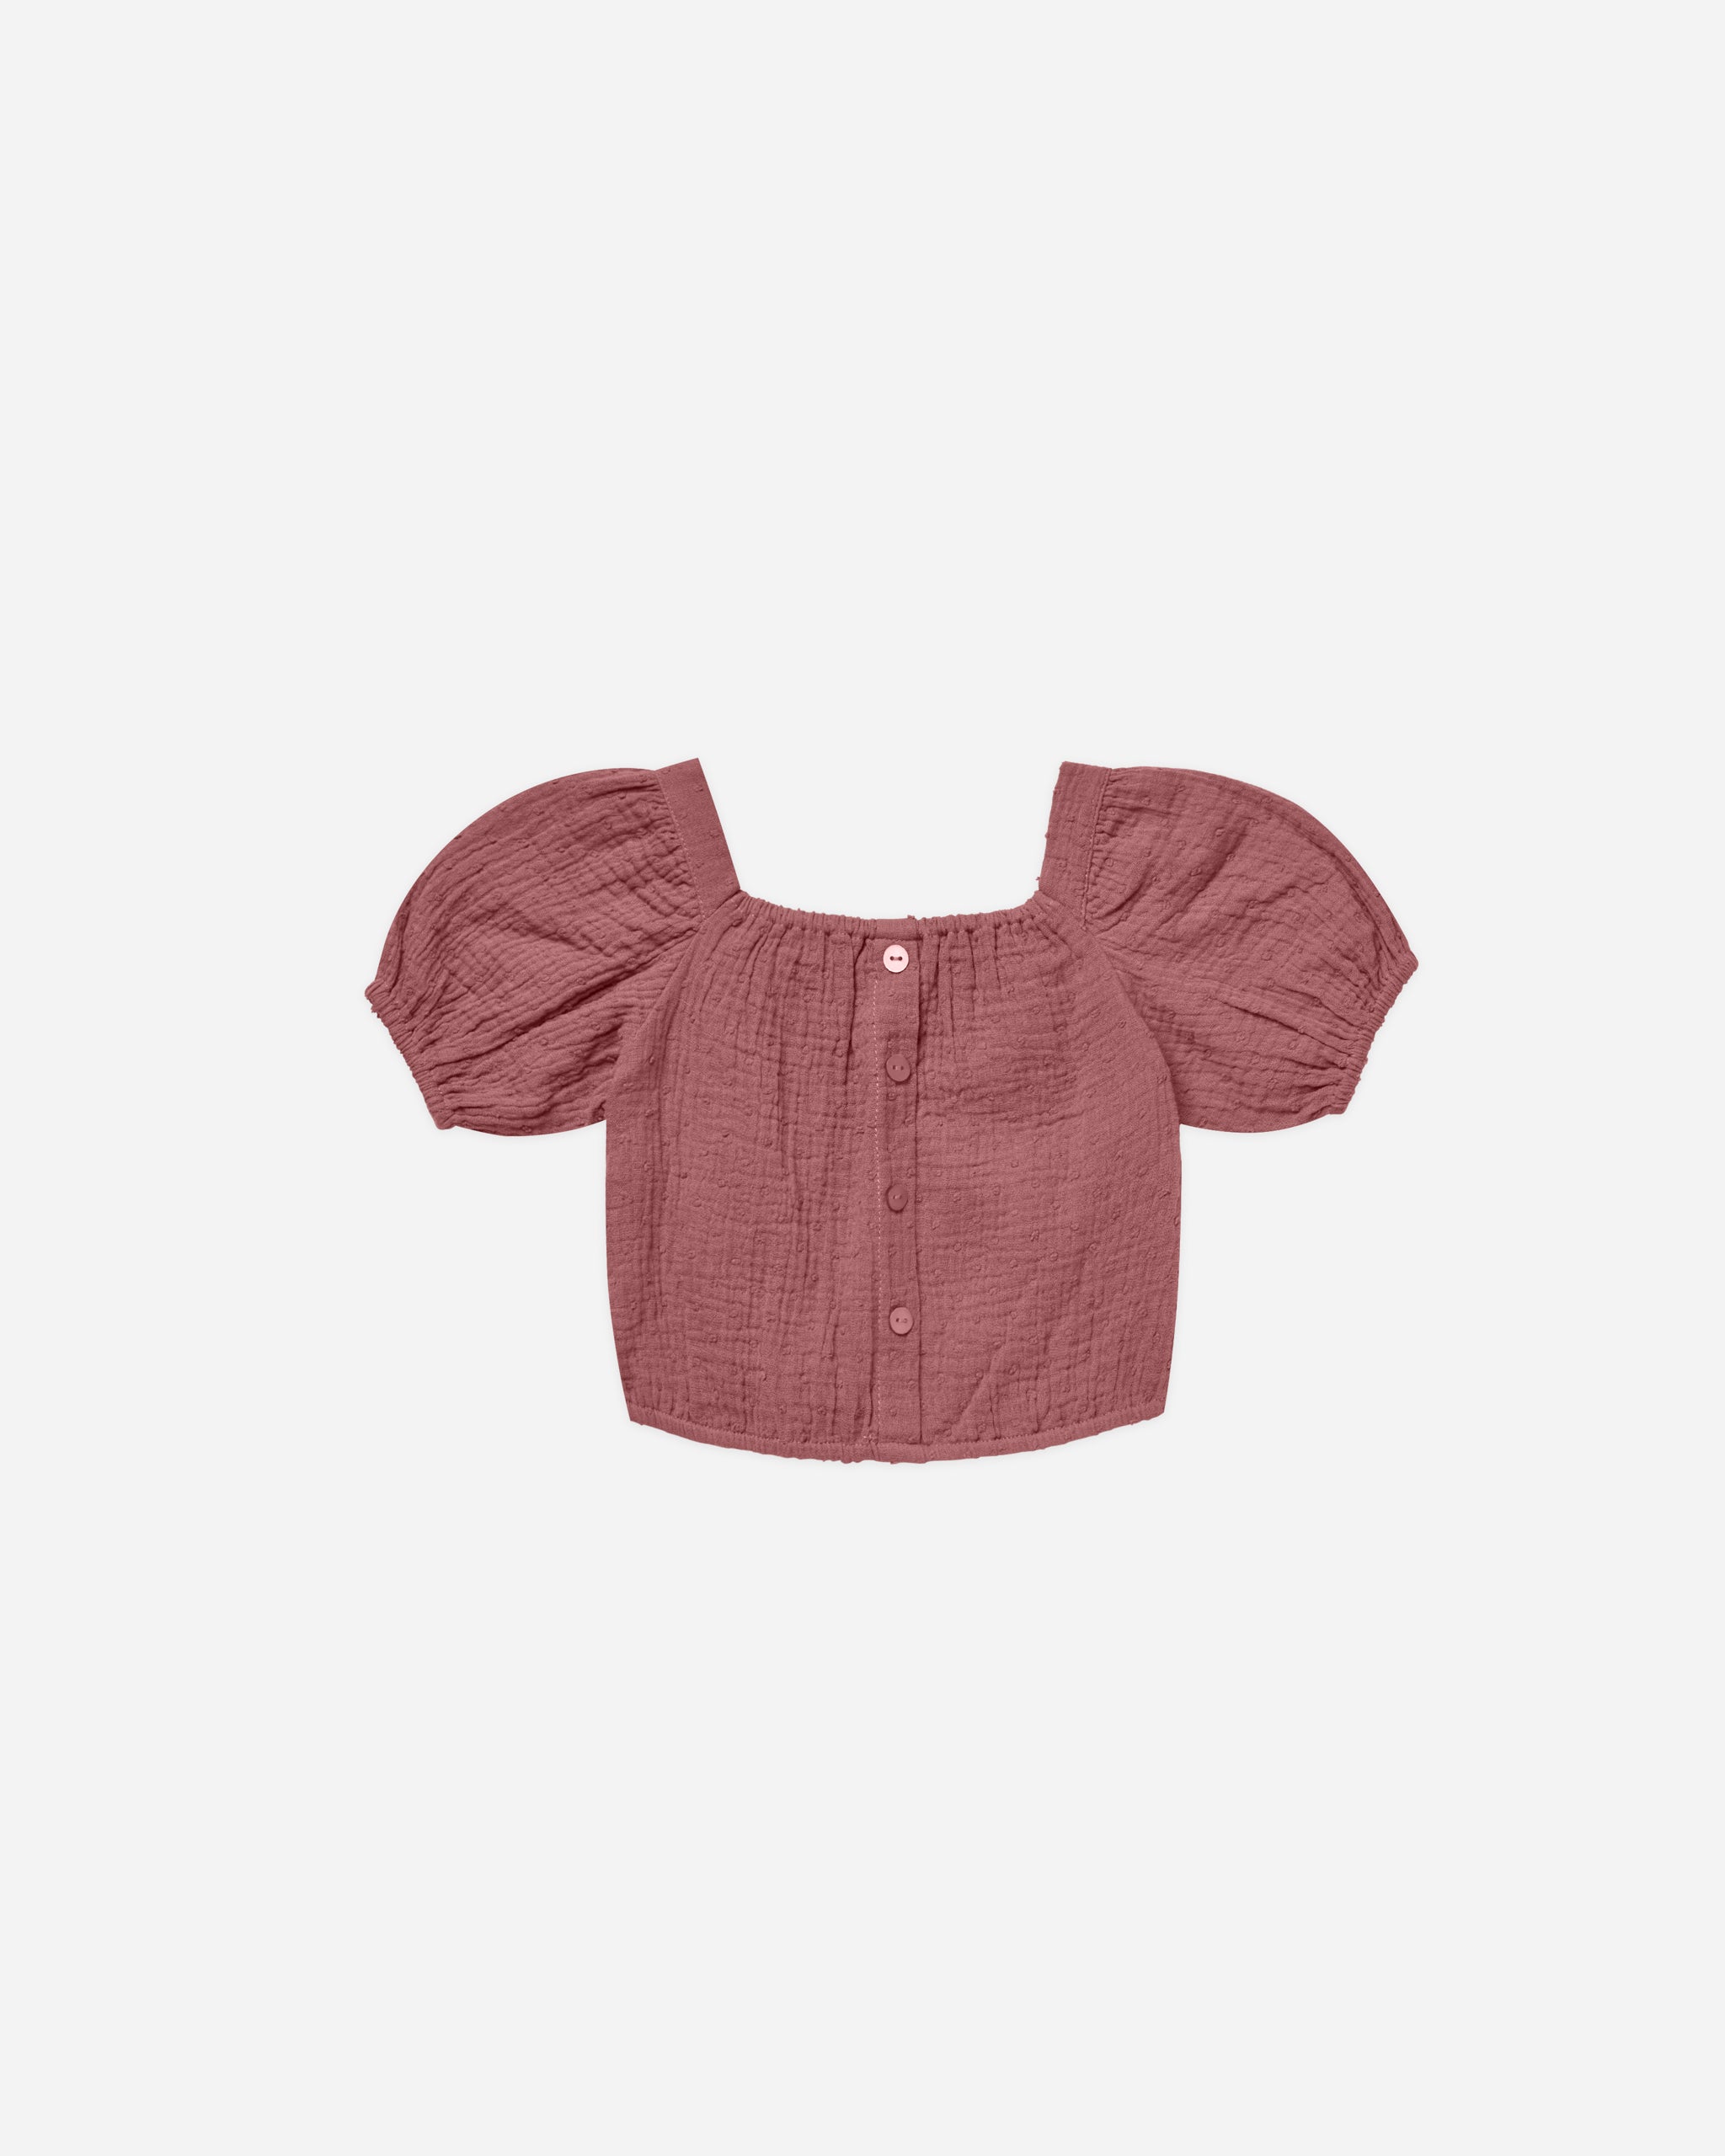 Skipper Top || Raspberry - Rylee + Cru | Kids Clothes | Trendy Baby Clothes | Modern Infant Outfits |